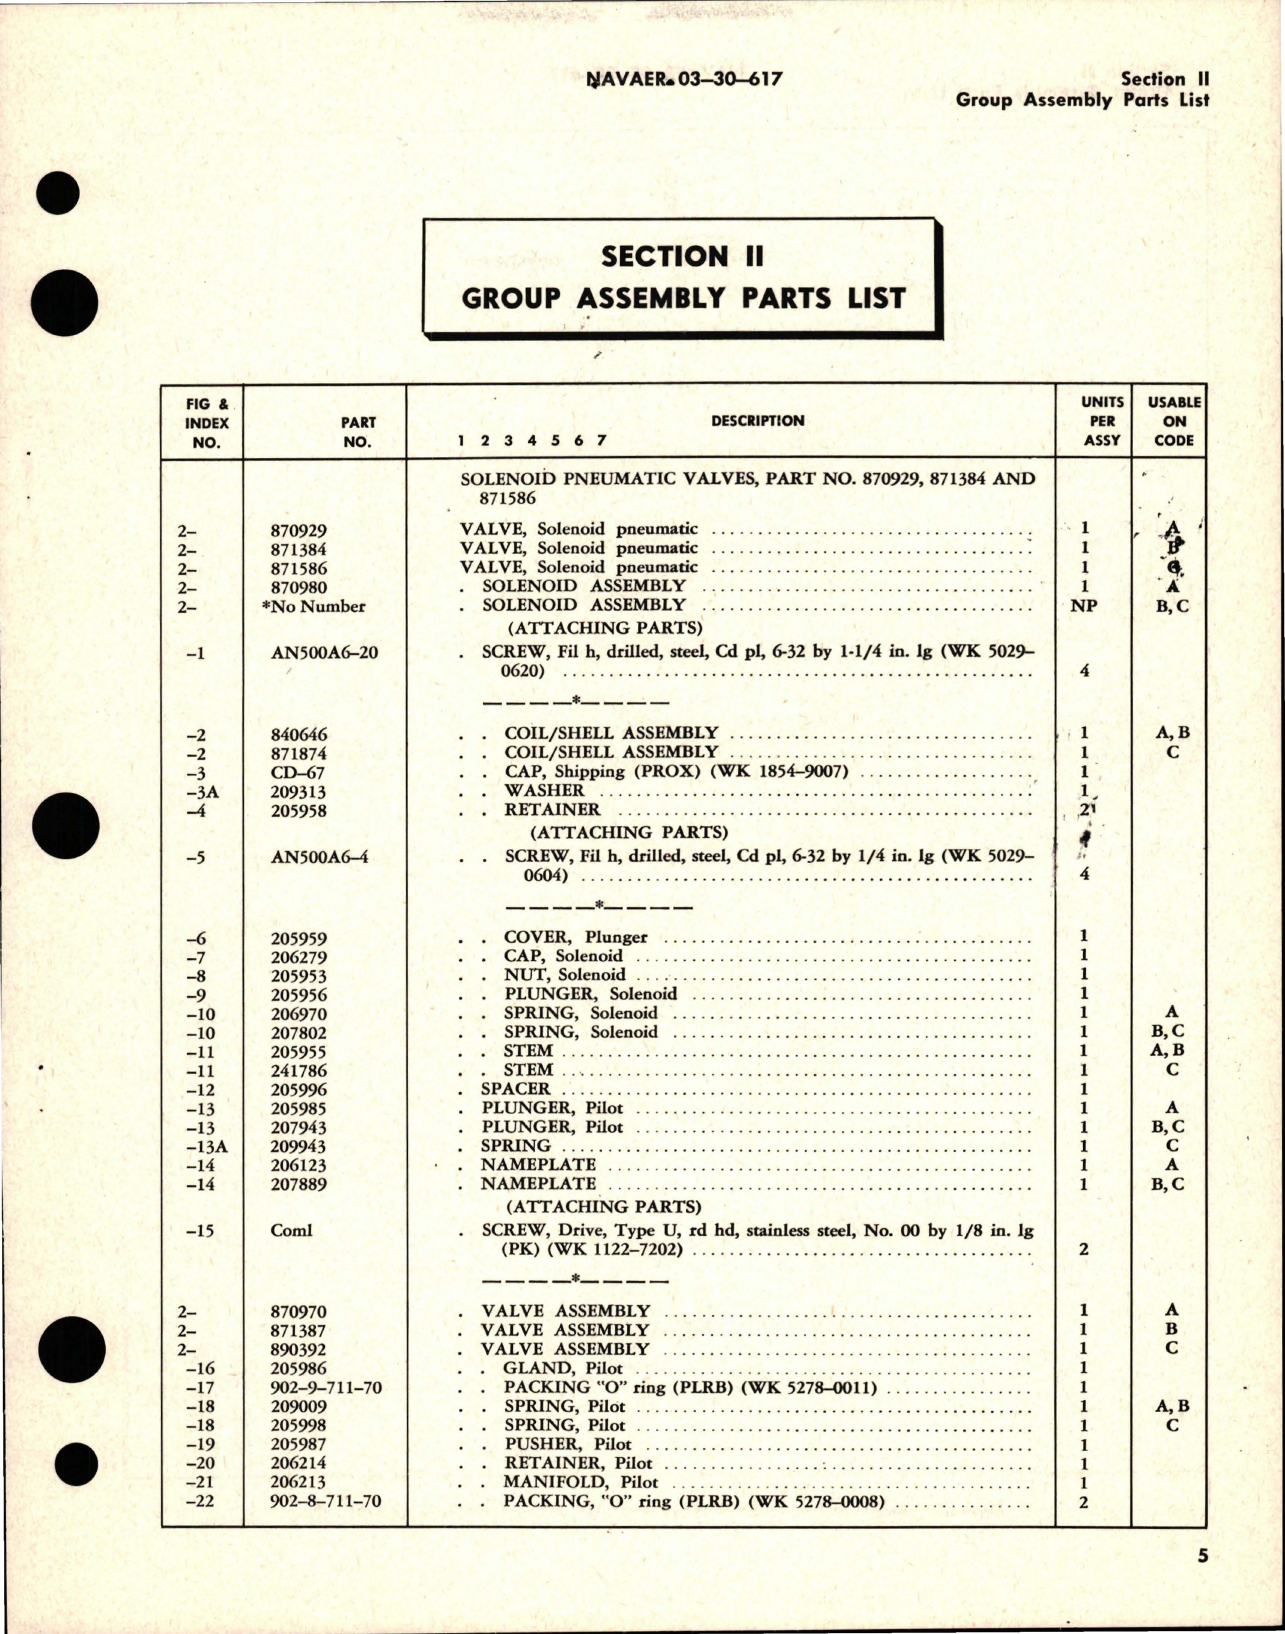 Sample page 7 from AirCorps Library document: Illustrated Parts Breakdown for Solenoid Pneumatic Valves